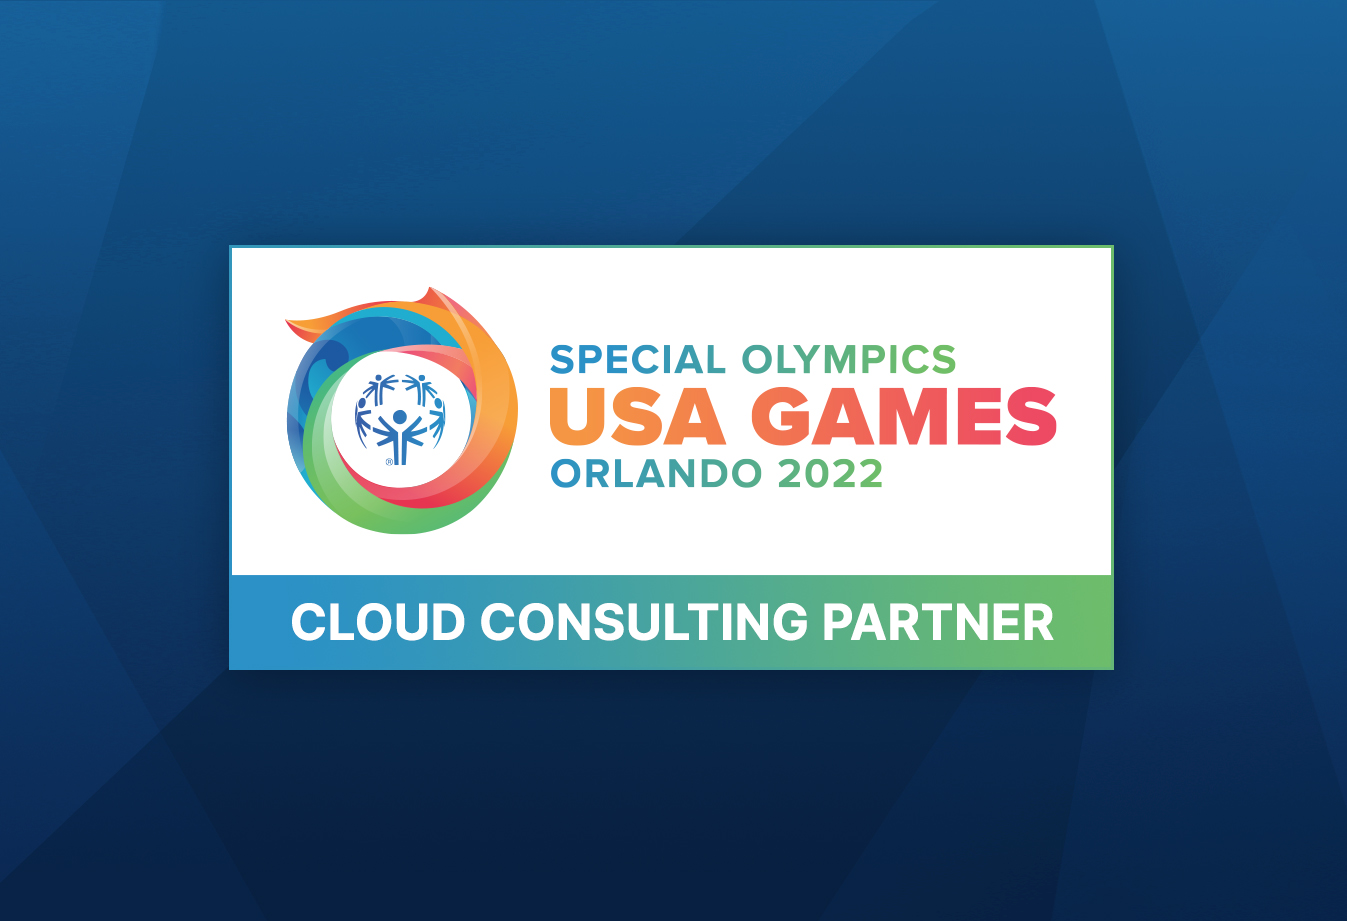 Solodev Selected as Cloud Consulting Partner of the 2022 Special Olympics USA Games Image